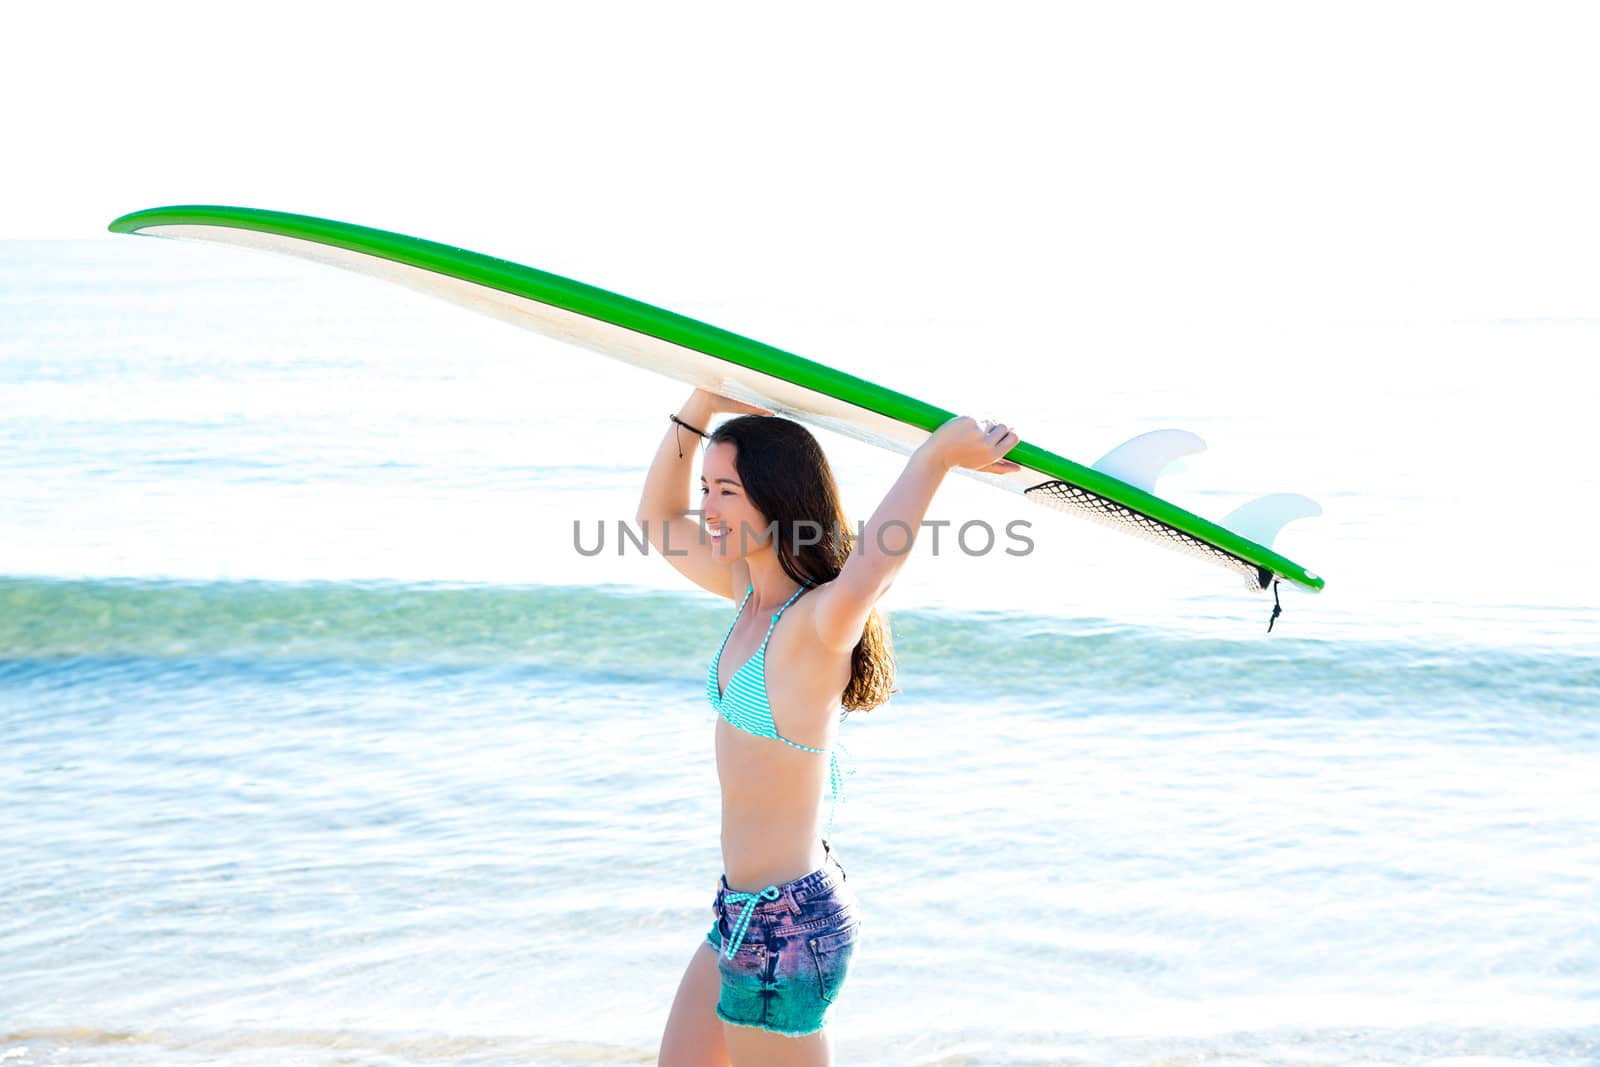 Surf girl with surfboard in beach shore by lunamarina